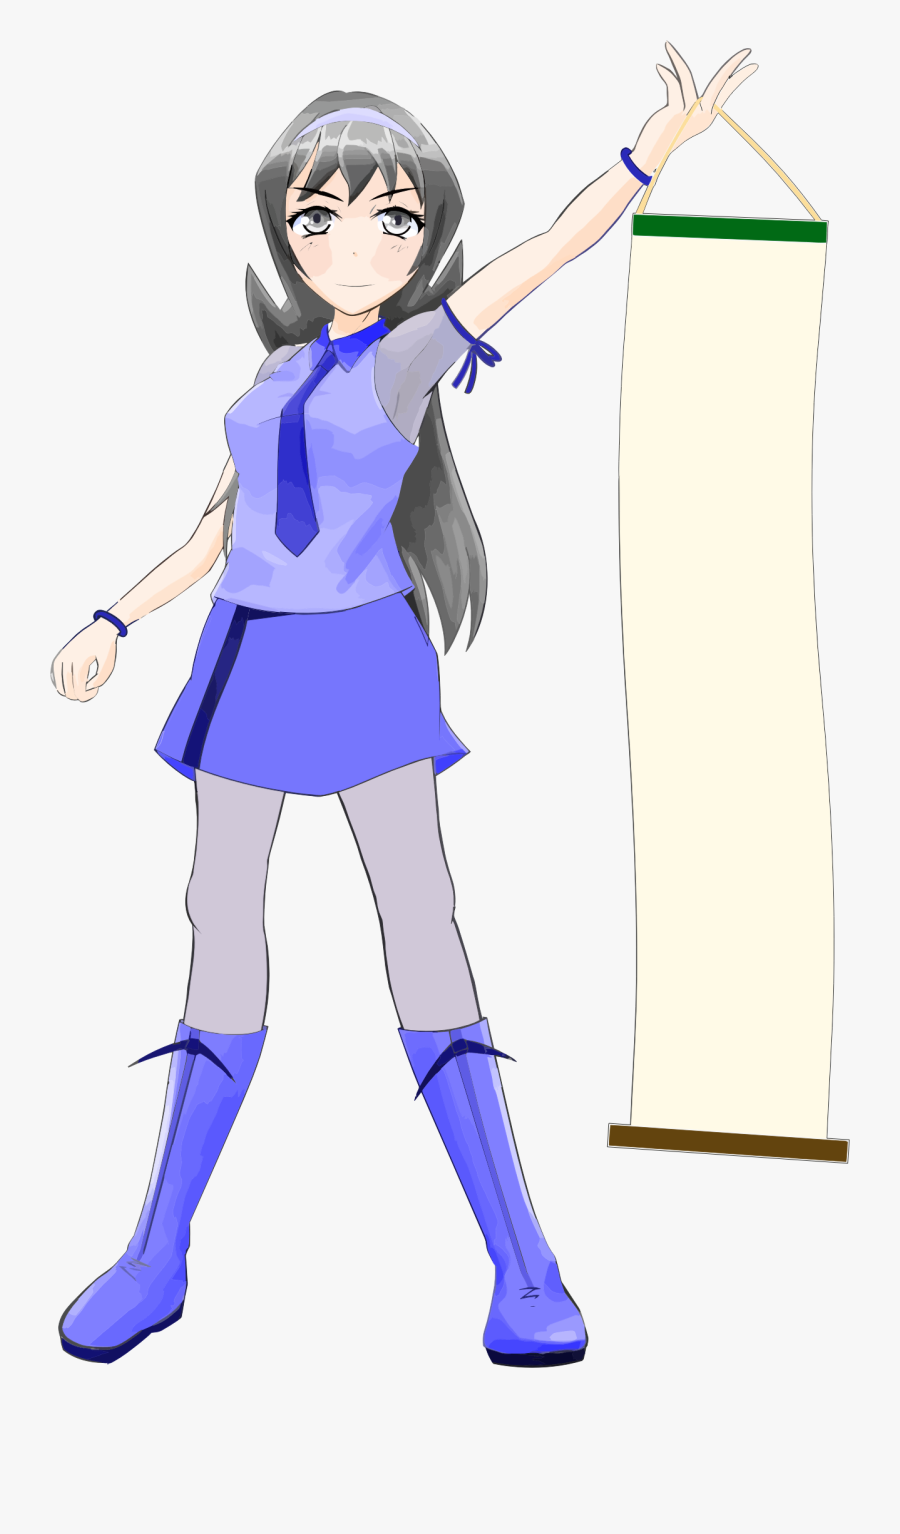 Thumb Image - Clipart Anime Girl, Transparent Clipart